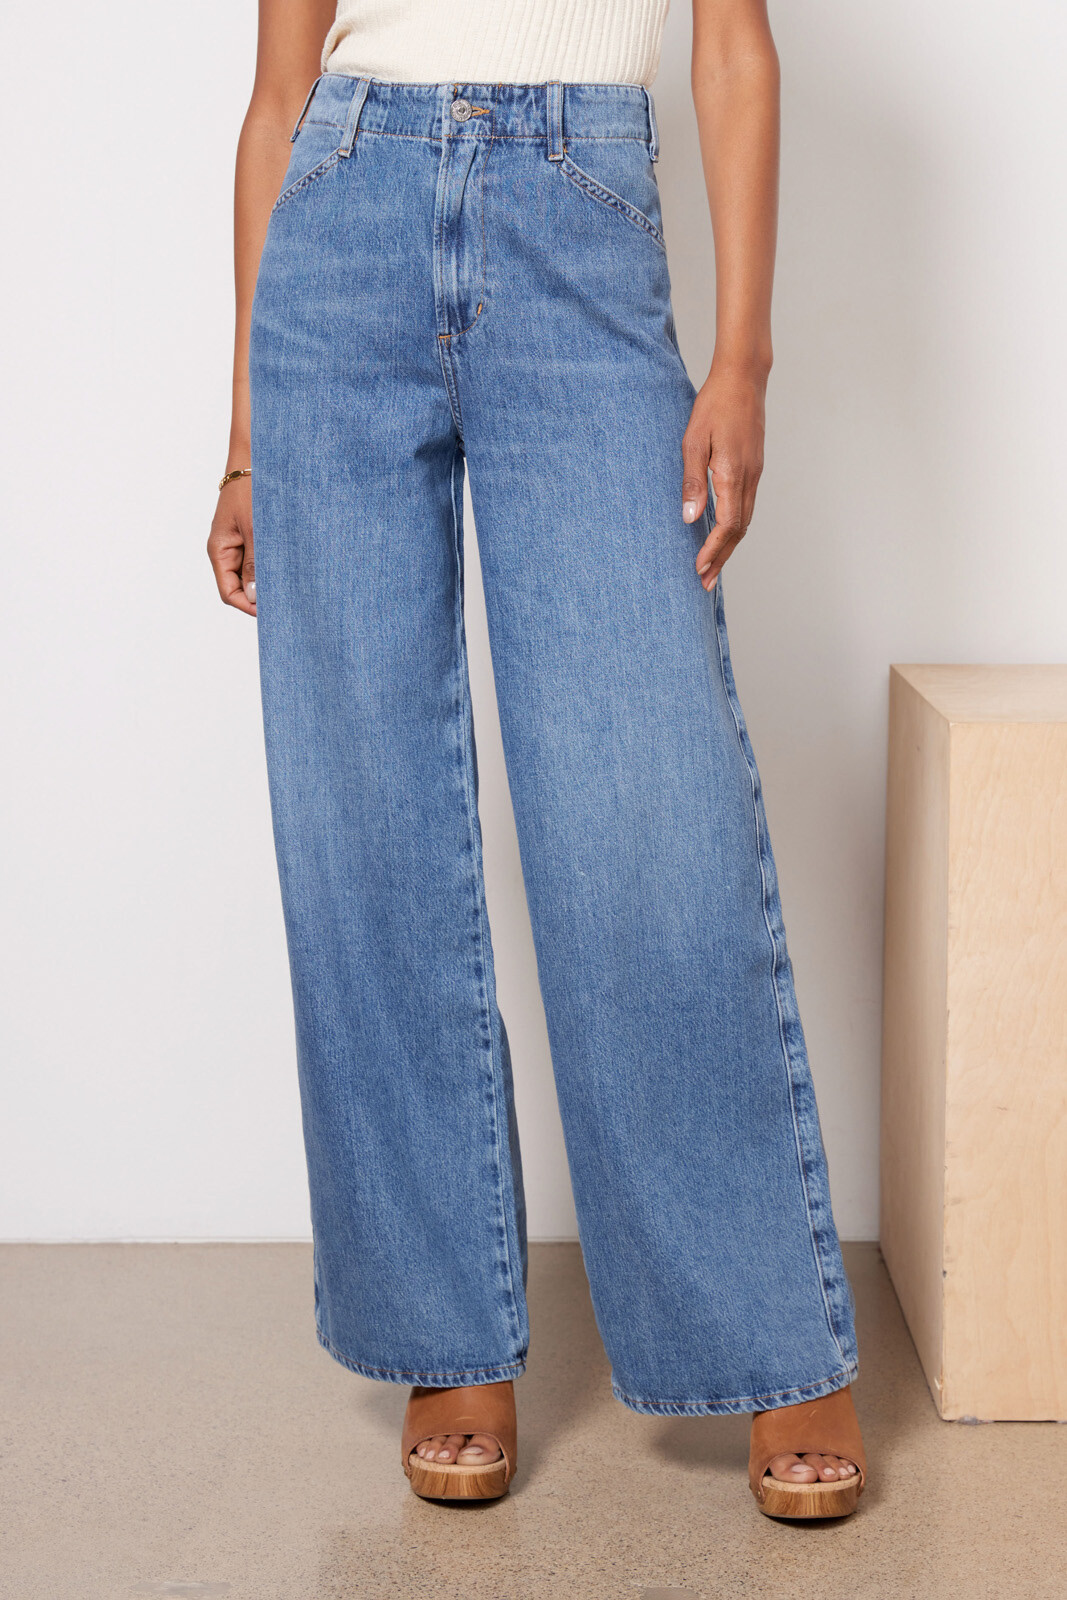 CITIZENS OF HUMANITY Paloma Trouser Jean | EVEREVE